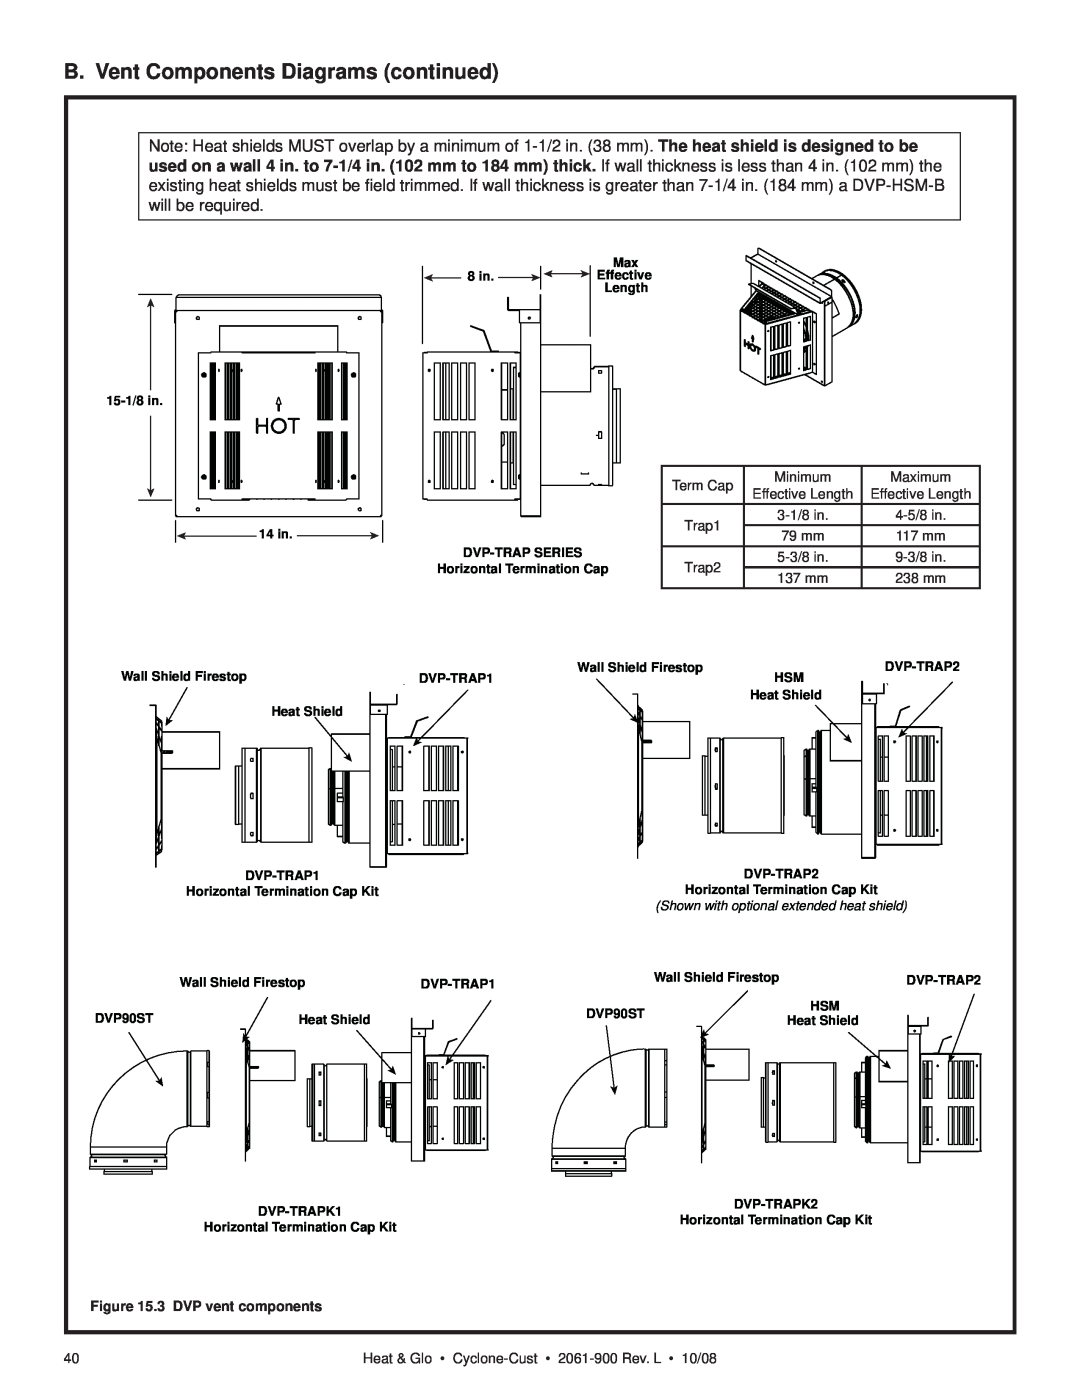 Hearth and Home Technologies Cyclone-Cust owner manual B. Vent Components Diagrams continued, 3 DVP vent components 